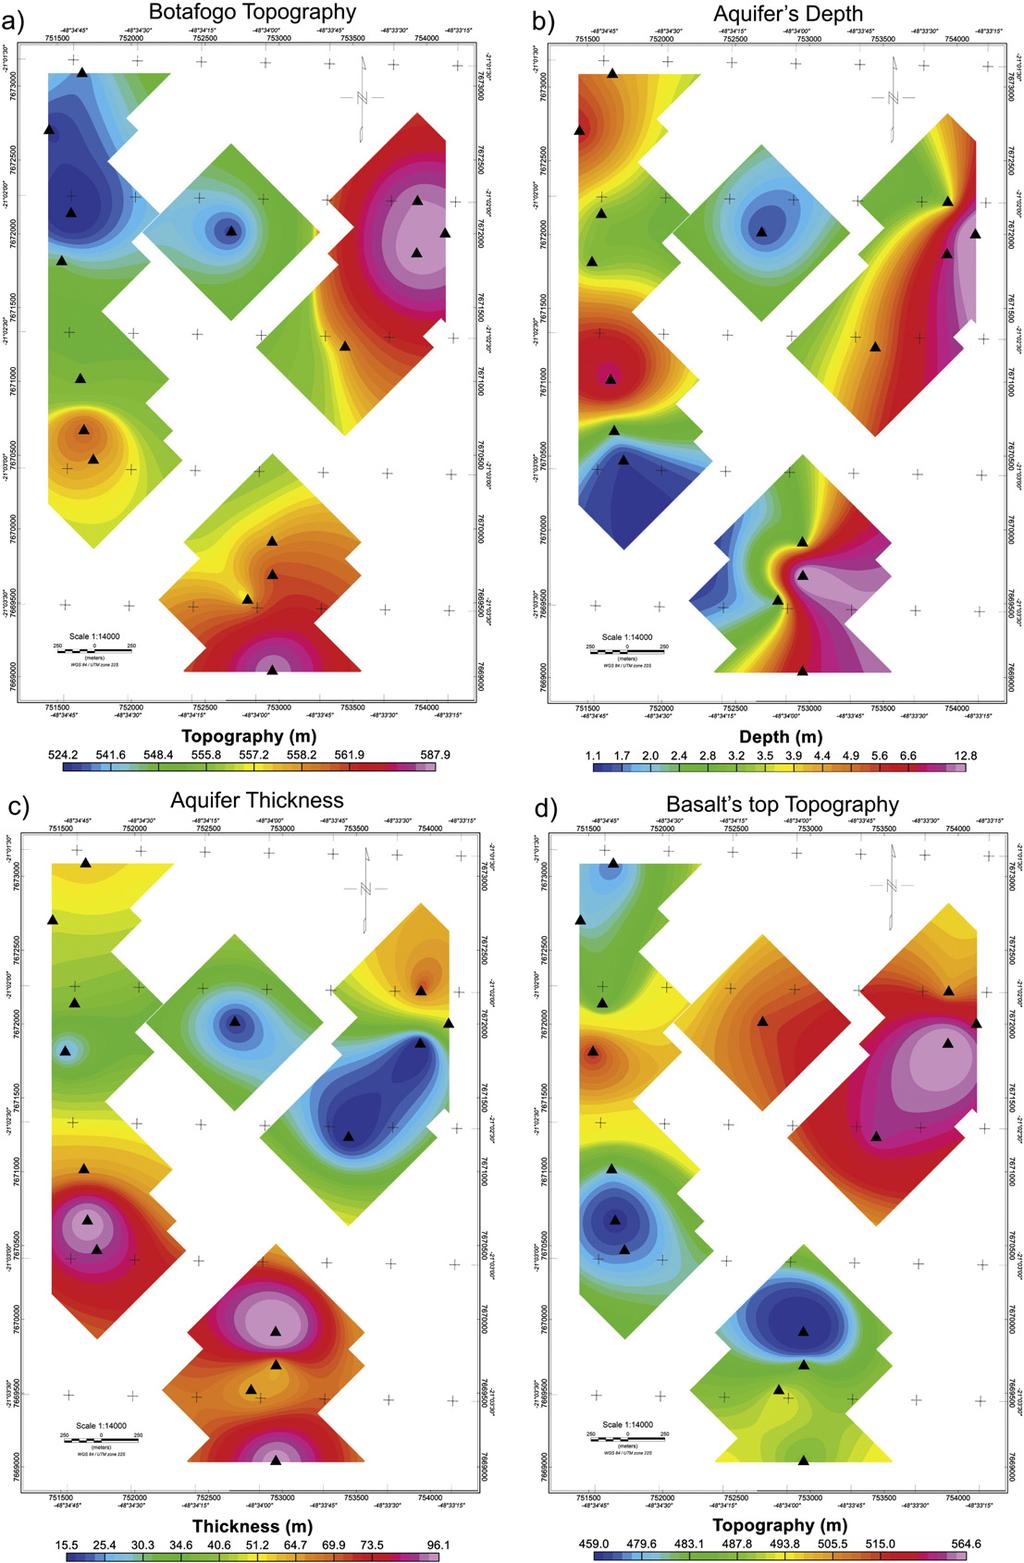 40 C.A. Bortolozo et al. / Journal of Applied Geophysics 111 (2014) 33 46 Fig. 7. Results from individual inversion of VES data in the Botafogo district.